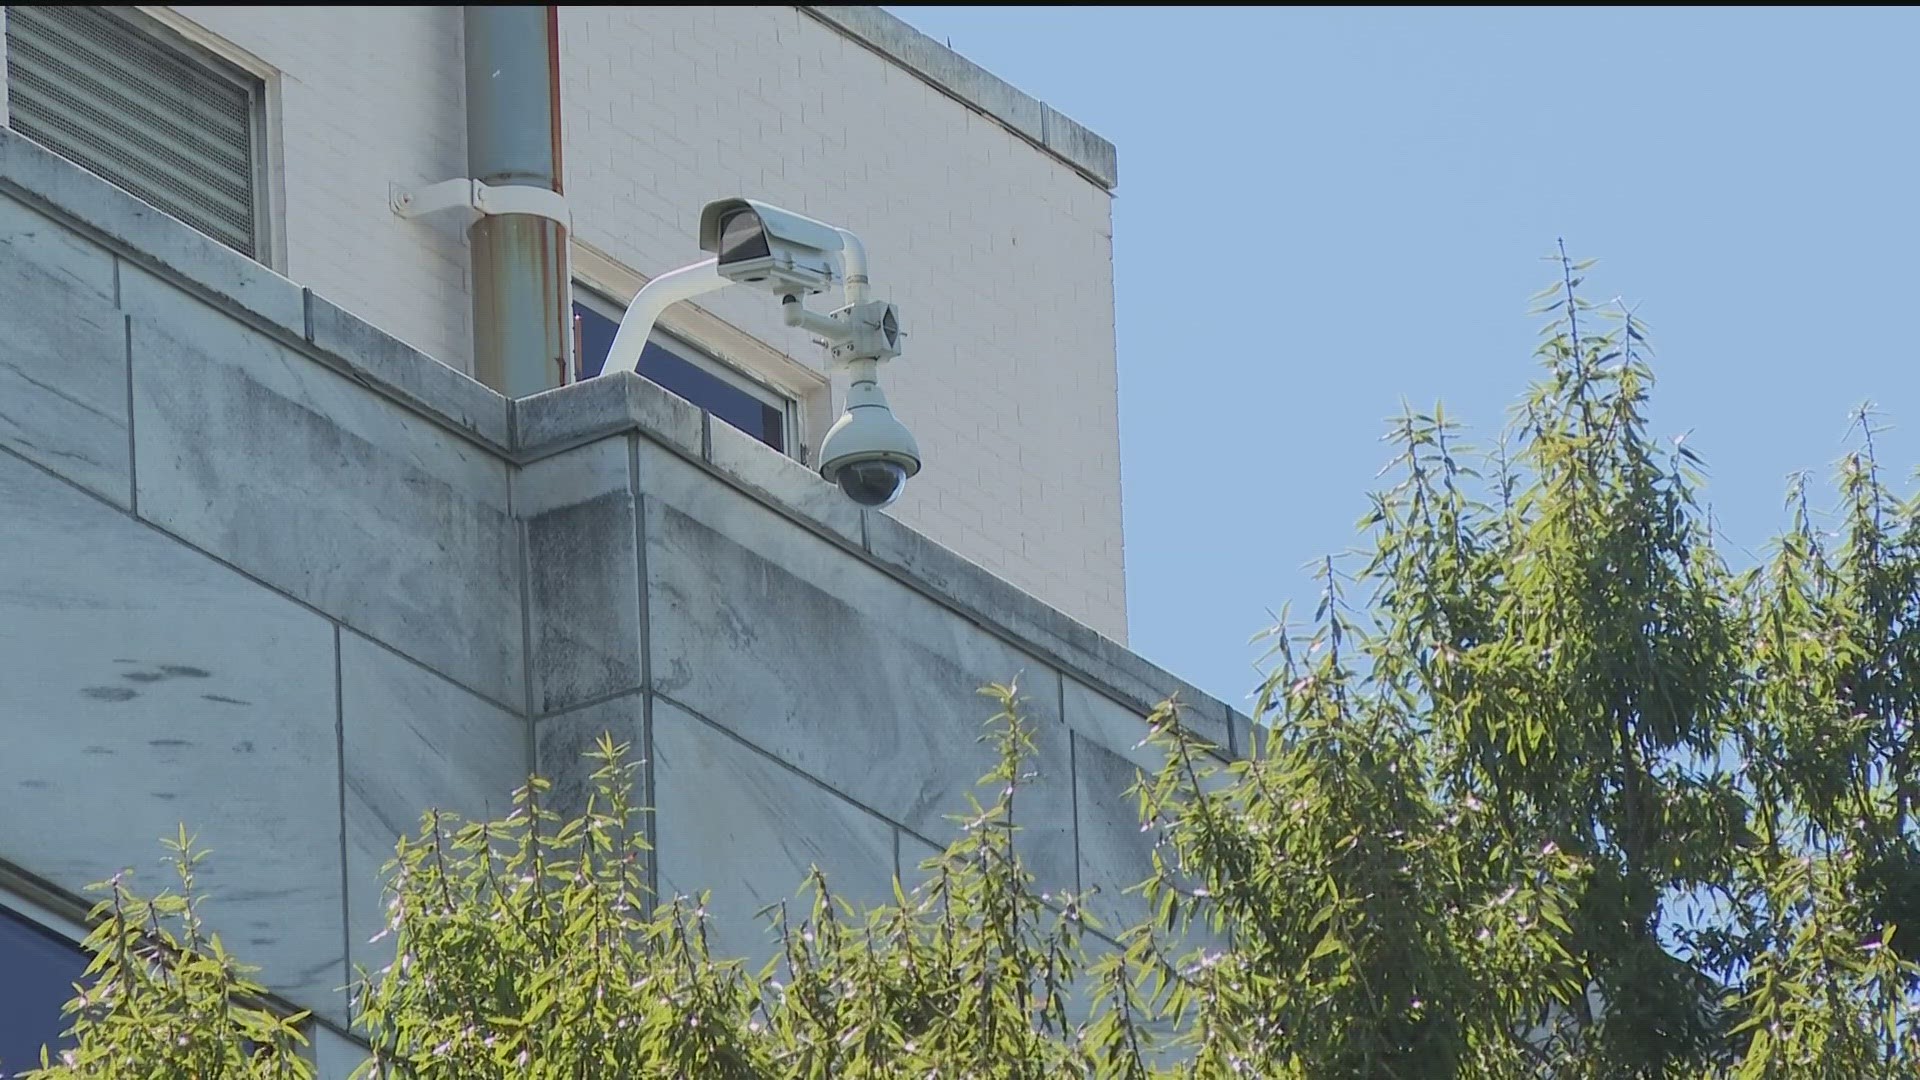 The City of Atlanta is moving with a plan to require more security cameras from business owners. It's hoping to keep families safe.